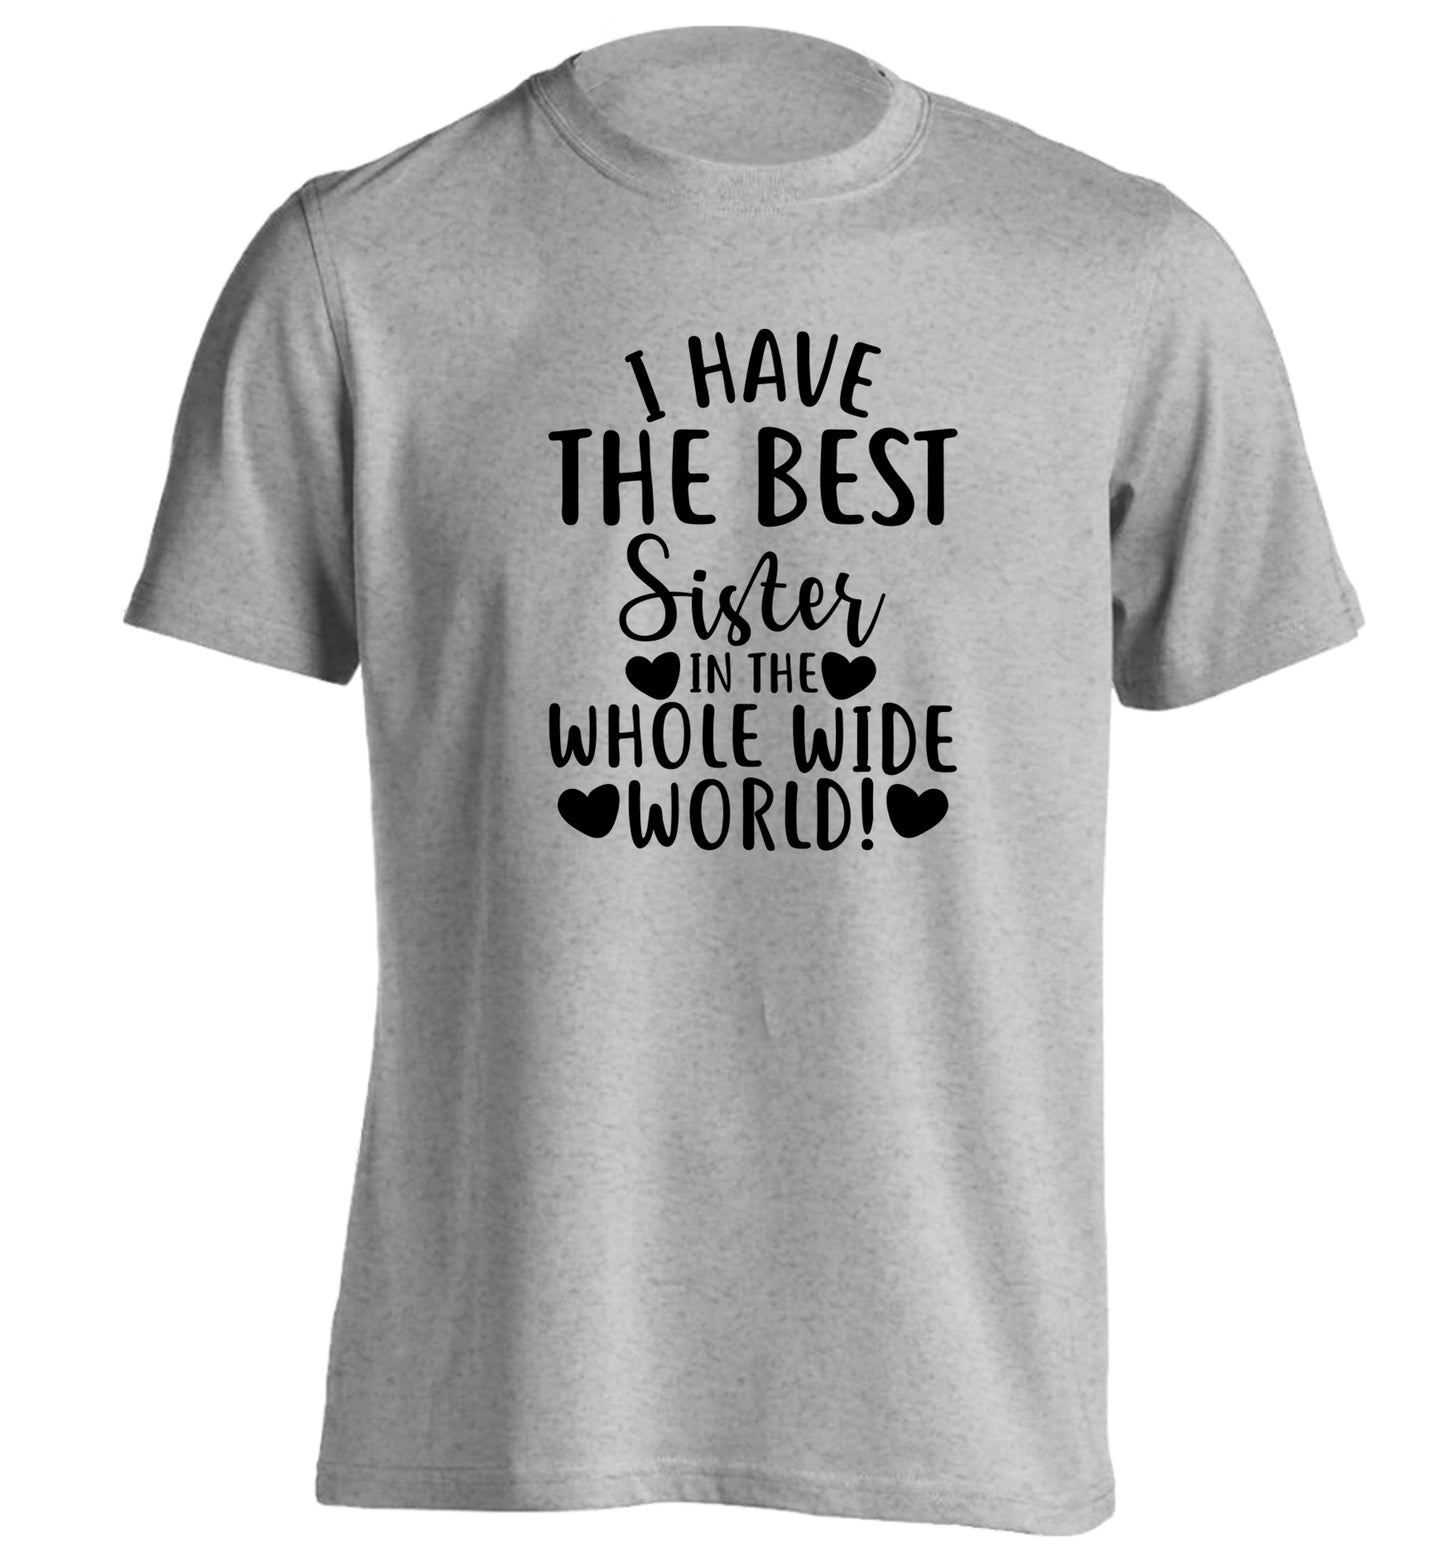 I have the best sister in the whole wide world! adults unisex grey Tshirt 2XL